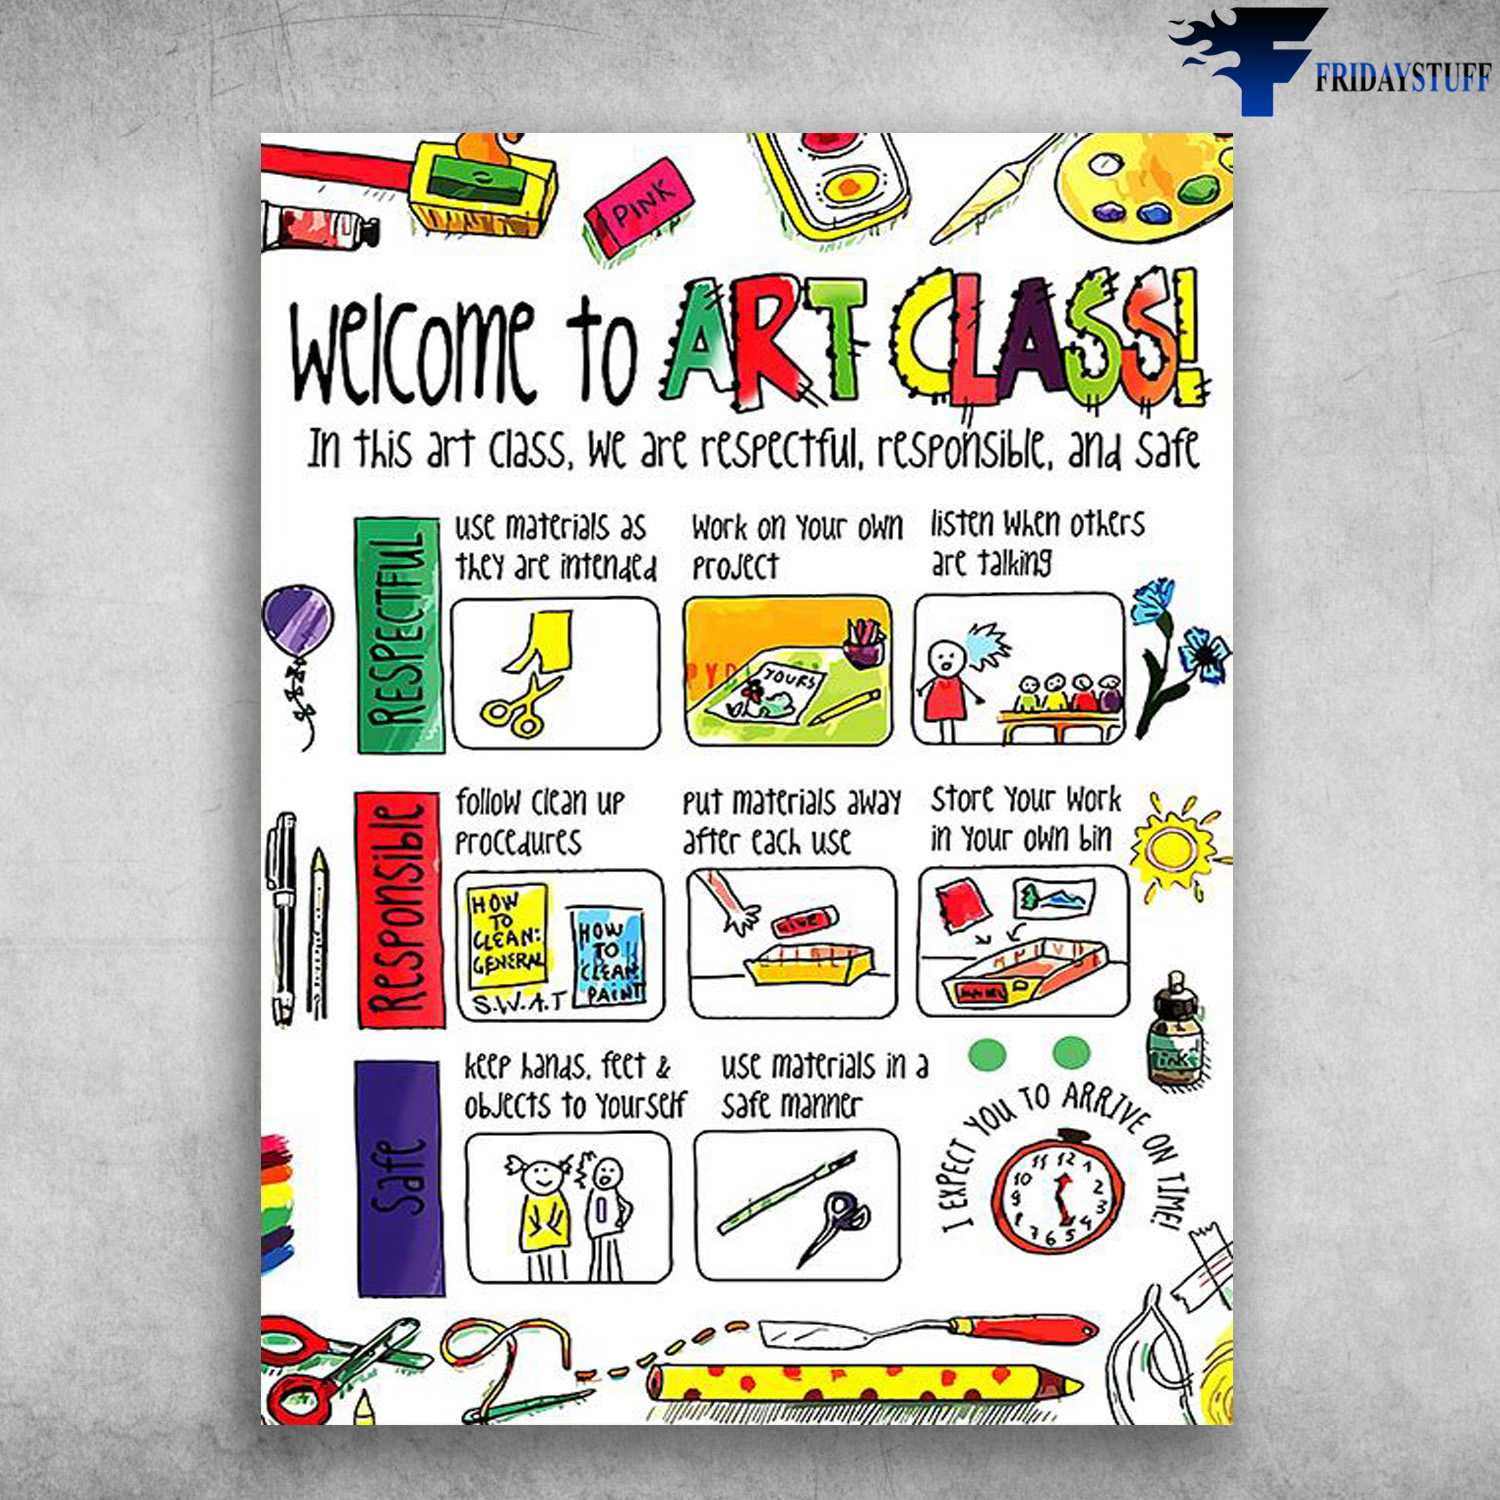 Art Class, Classroom Poster - Welcome To Art Class, In This Class, We Are Respectful, Responsible, And Safe, Use Matrerials As They Are Inttended, Work On Your Own Project, Listen When Others Are Talking